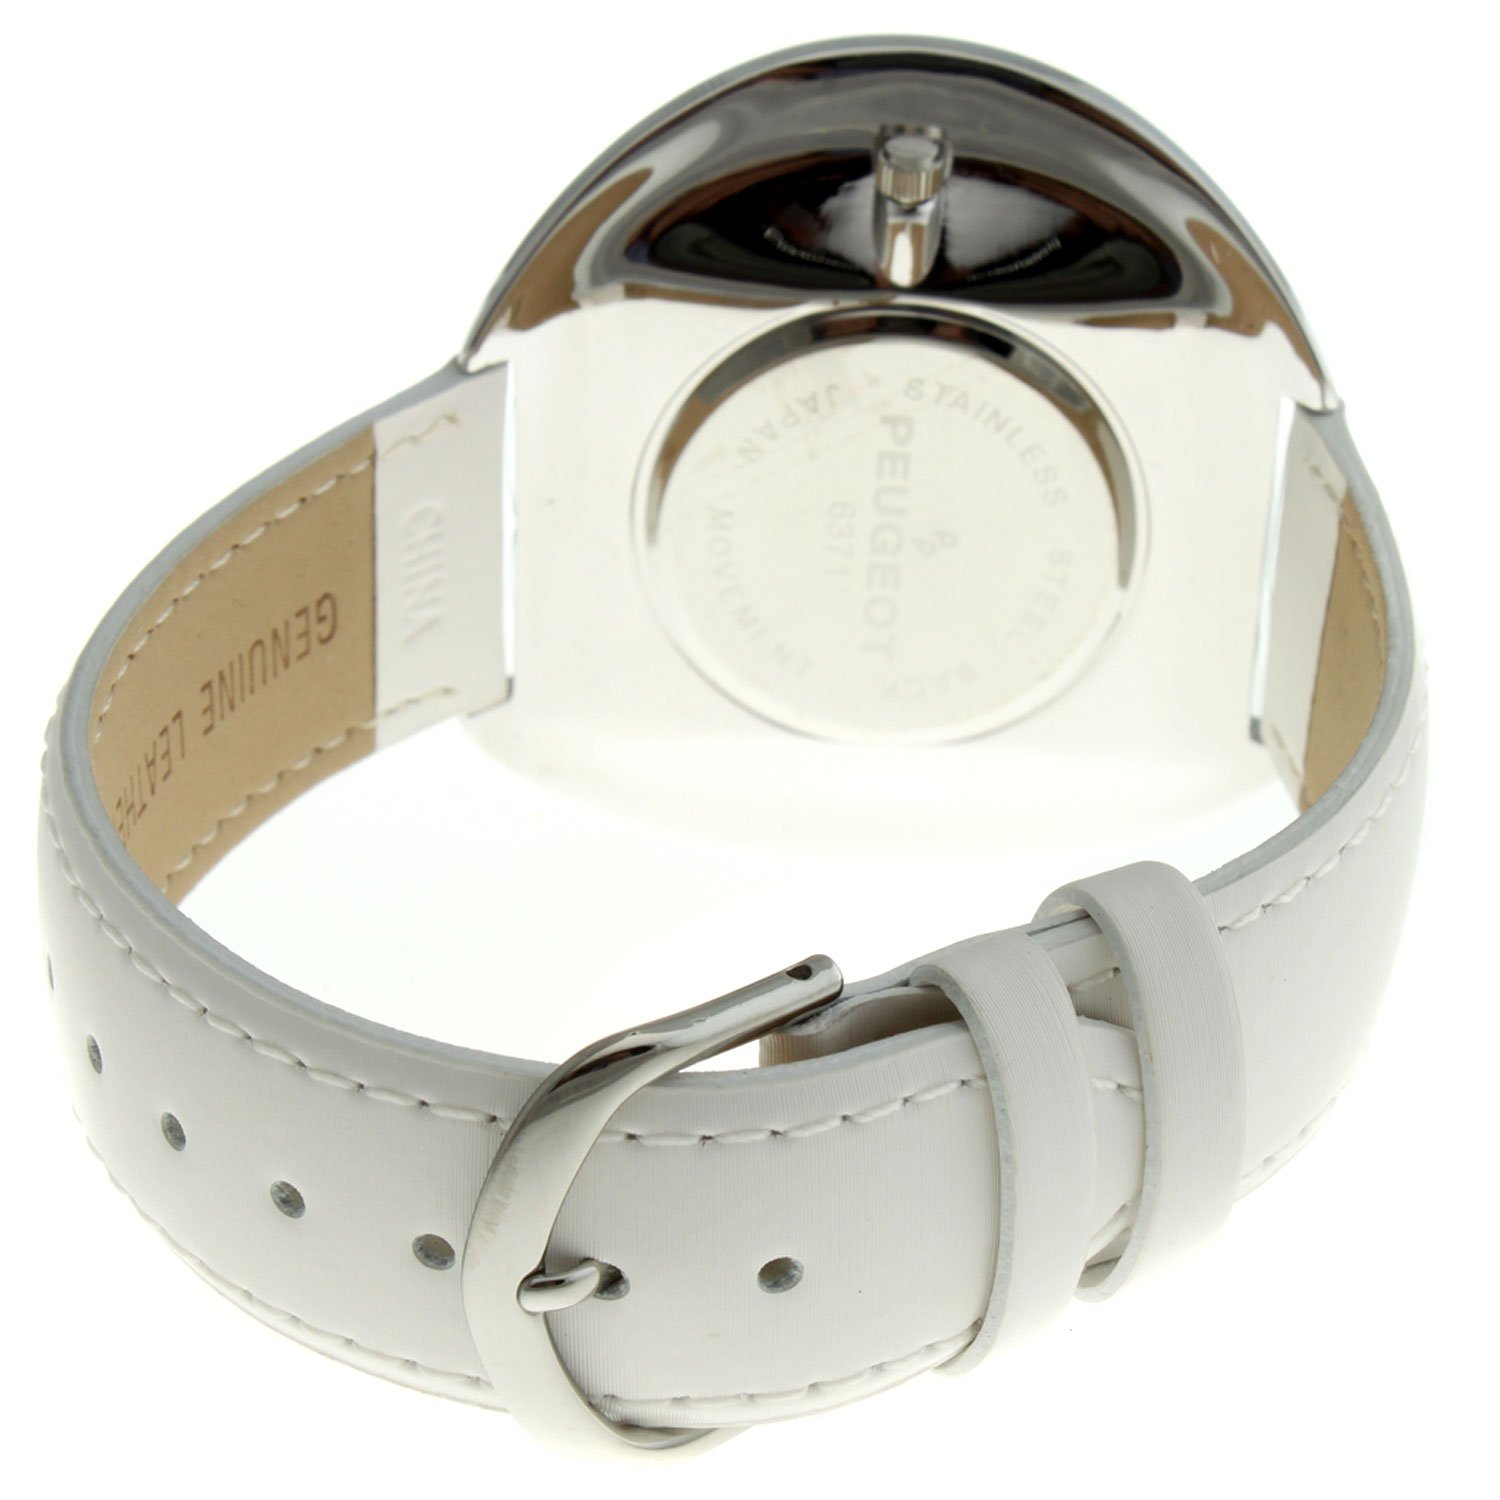 Peugeot Couture Crystal-Accented Wrist Watch with Curved Case and White Leather Strap Band